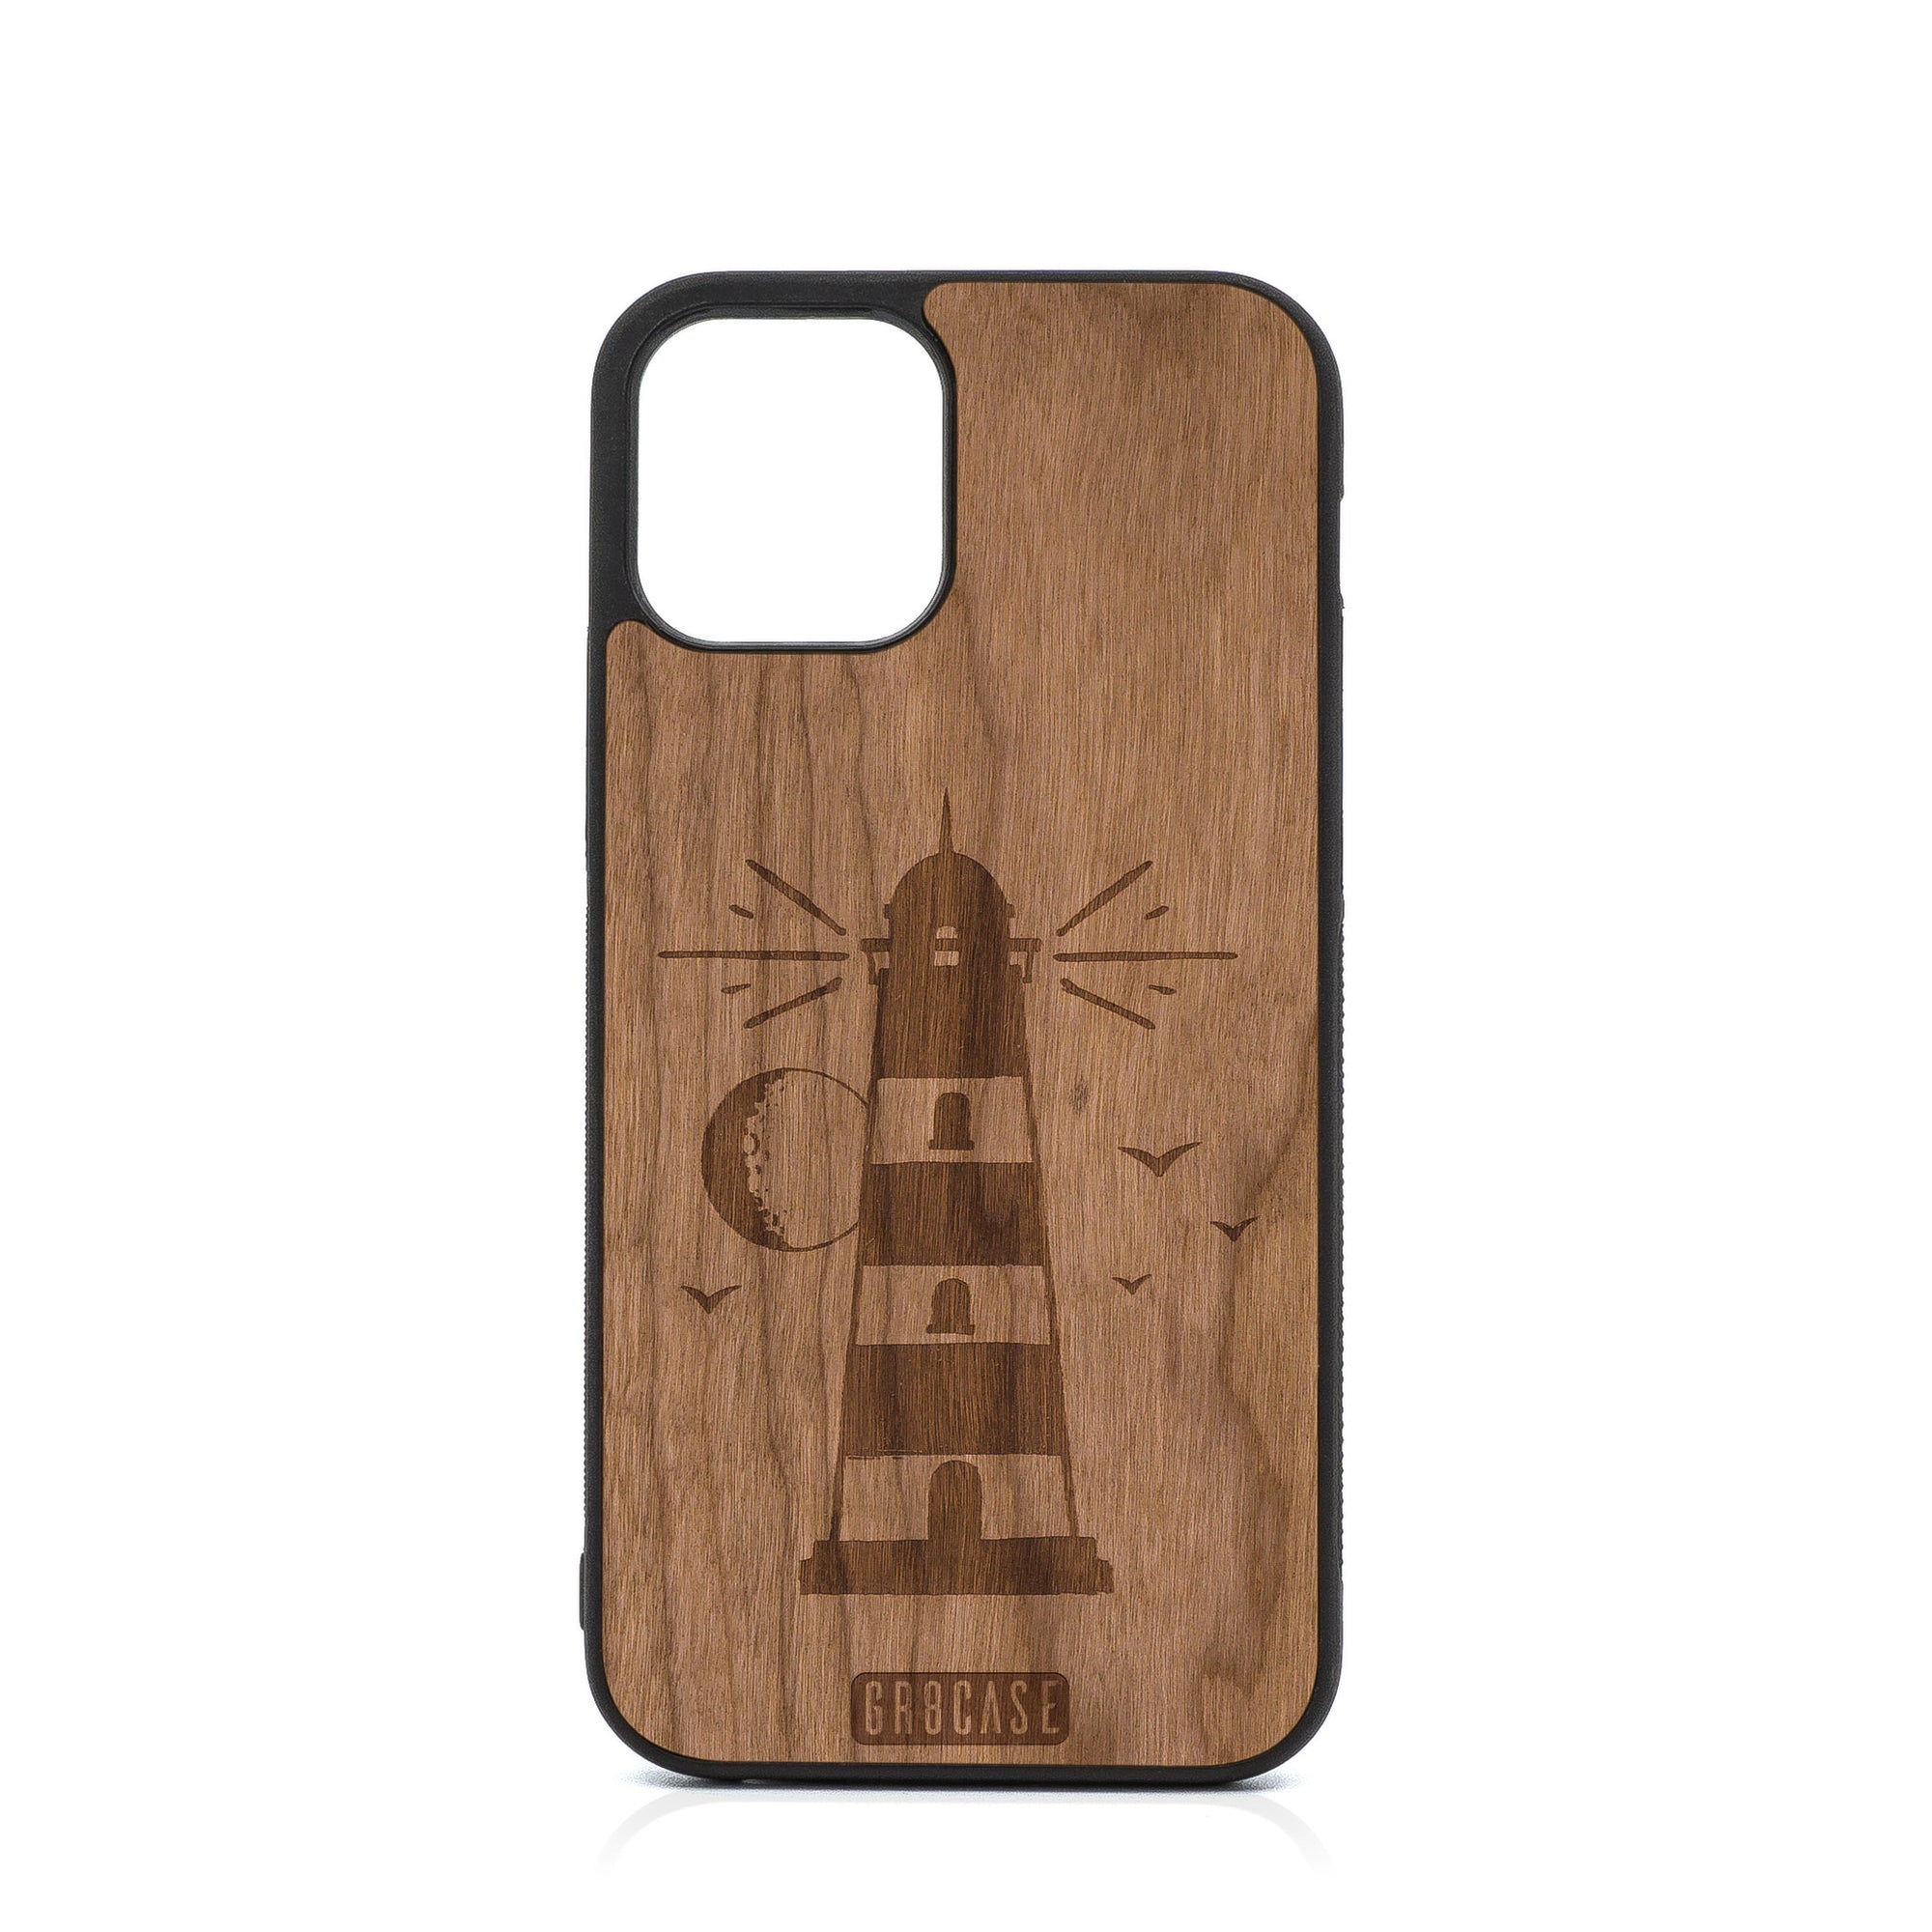 Midnight Lighthouse Design Wood Case For iPhone 12